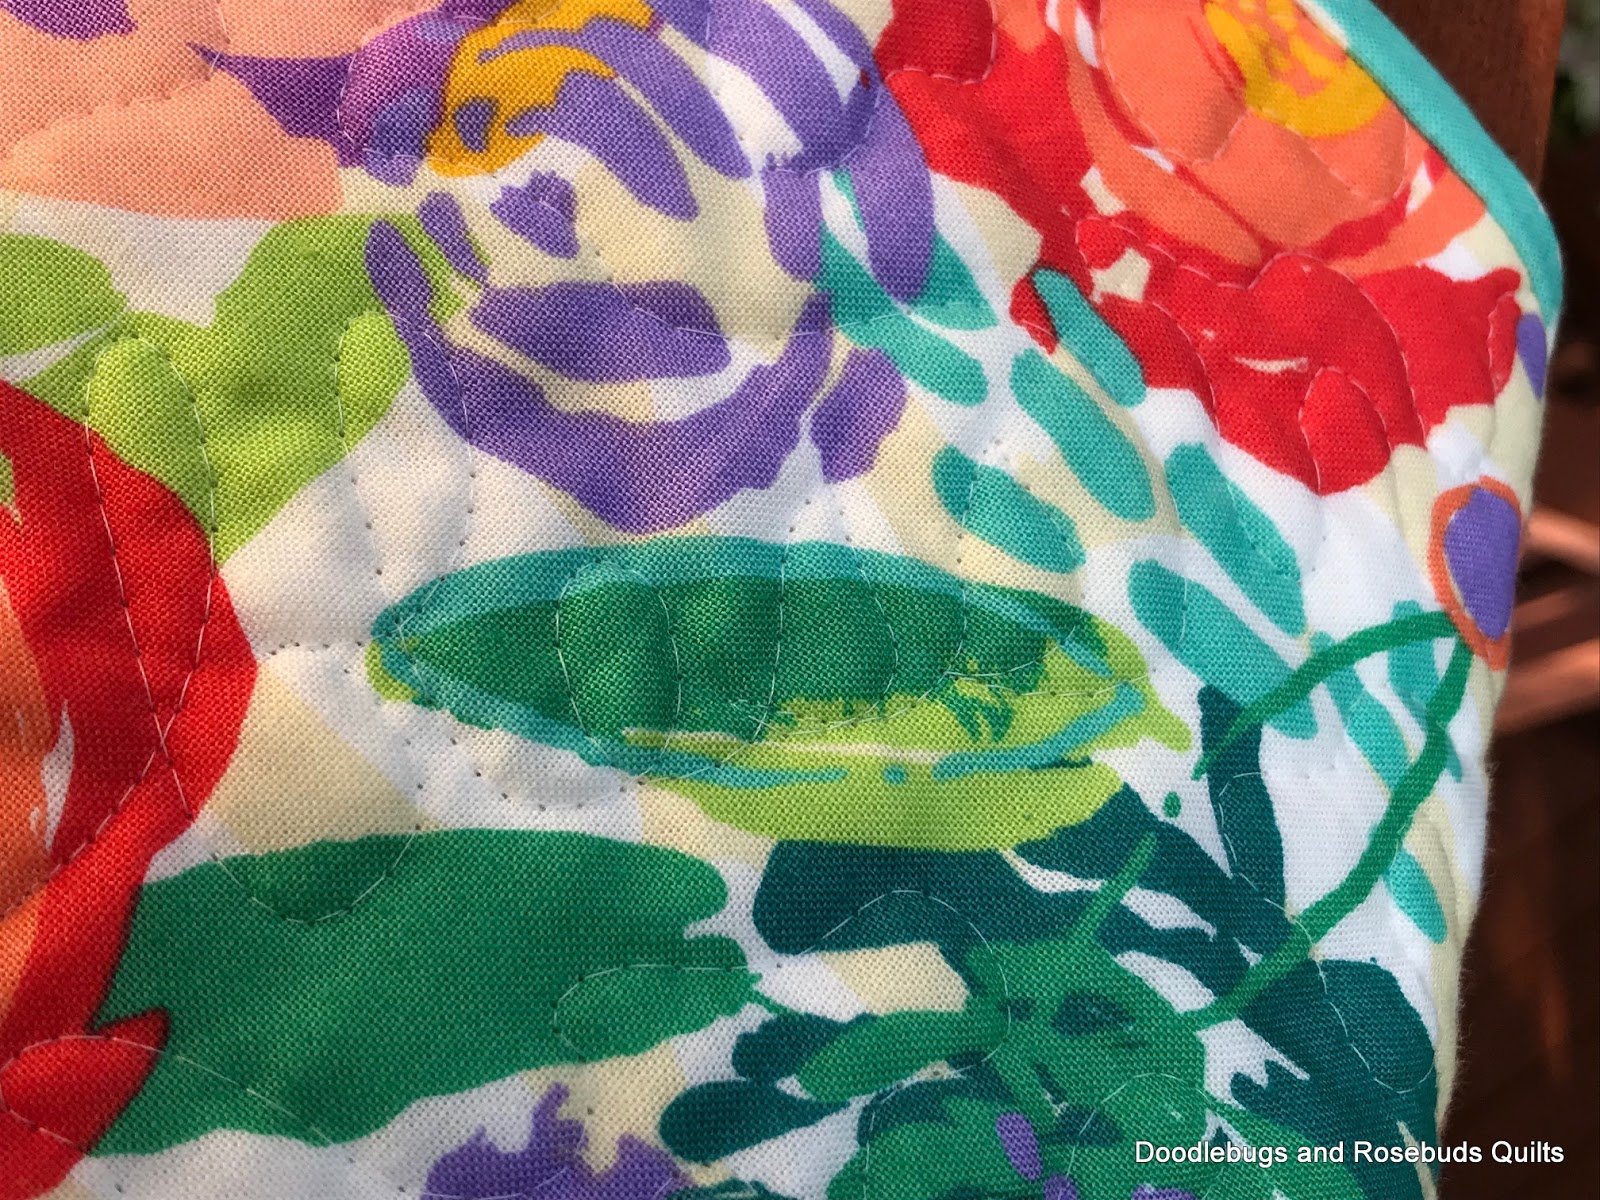 Doodlebugs and Rosebuds Quilts: Blessing Quilt